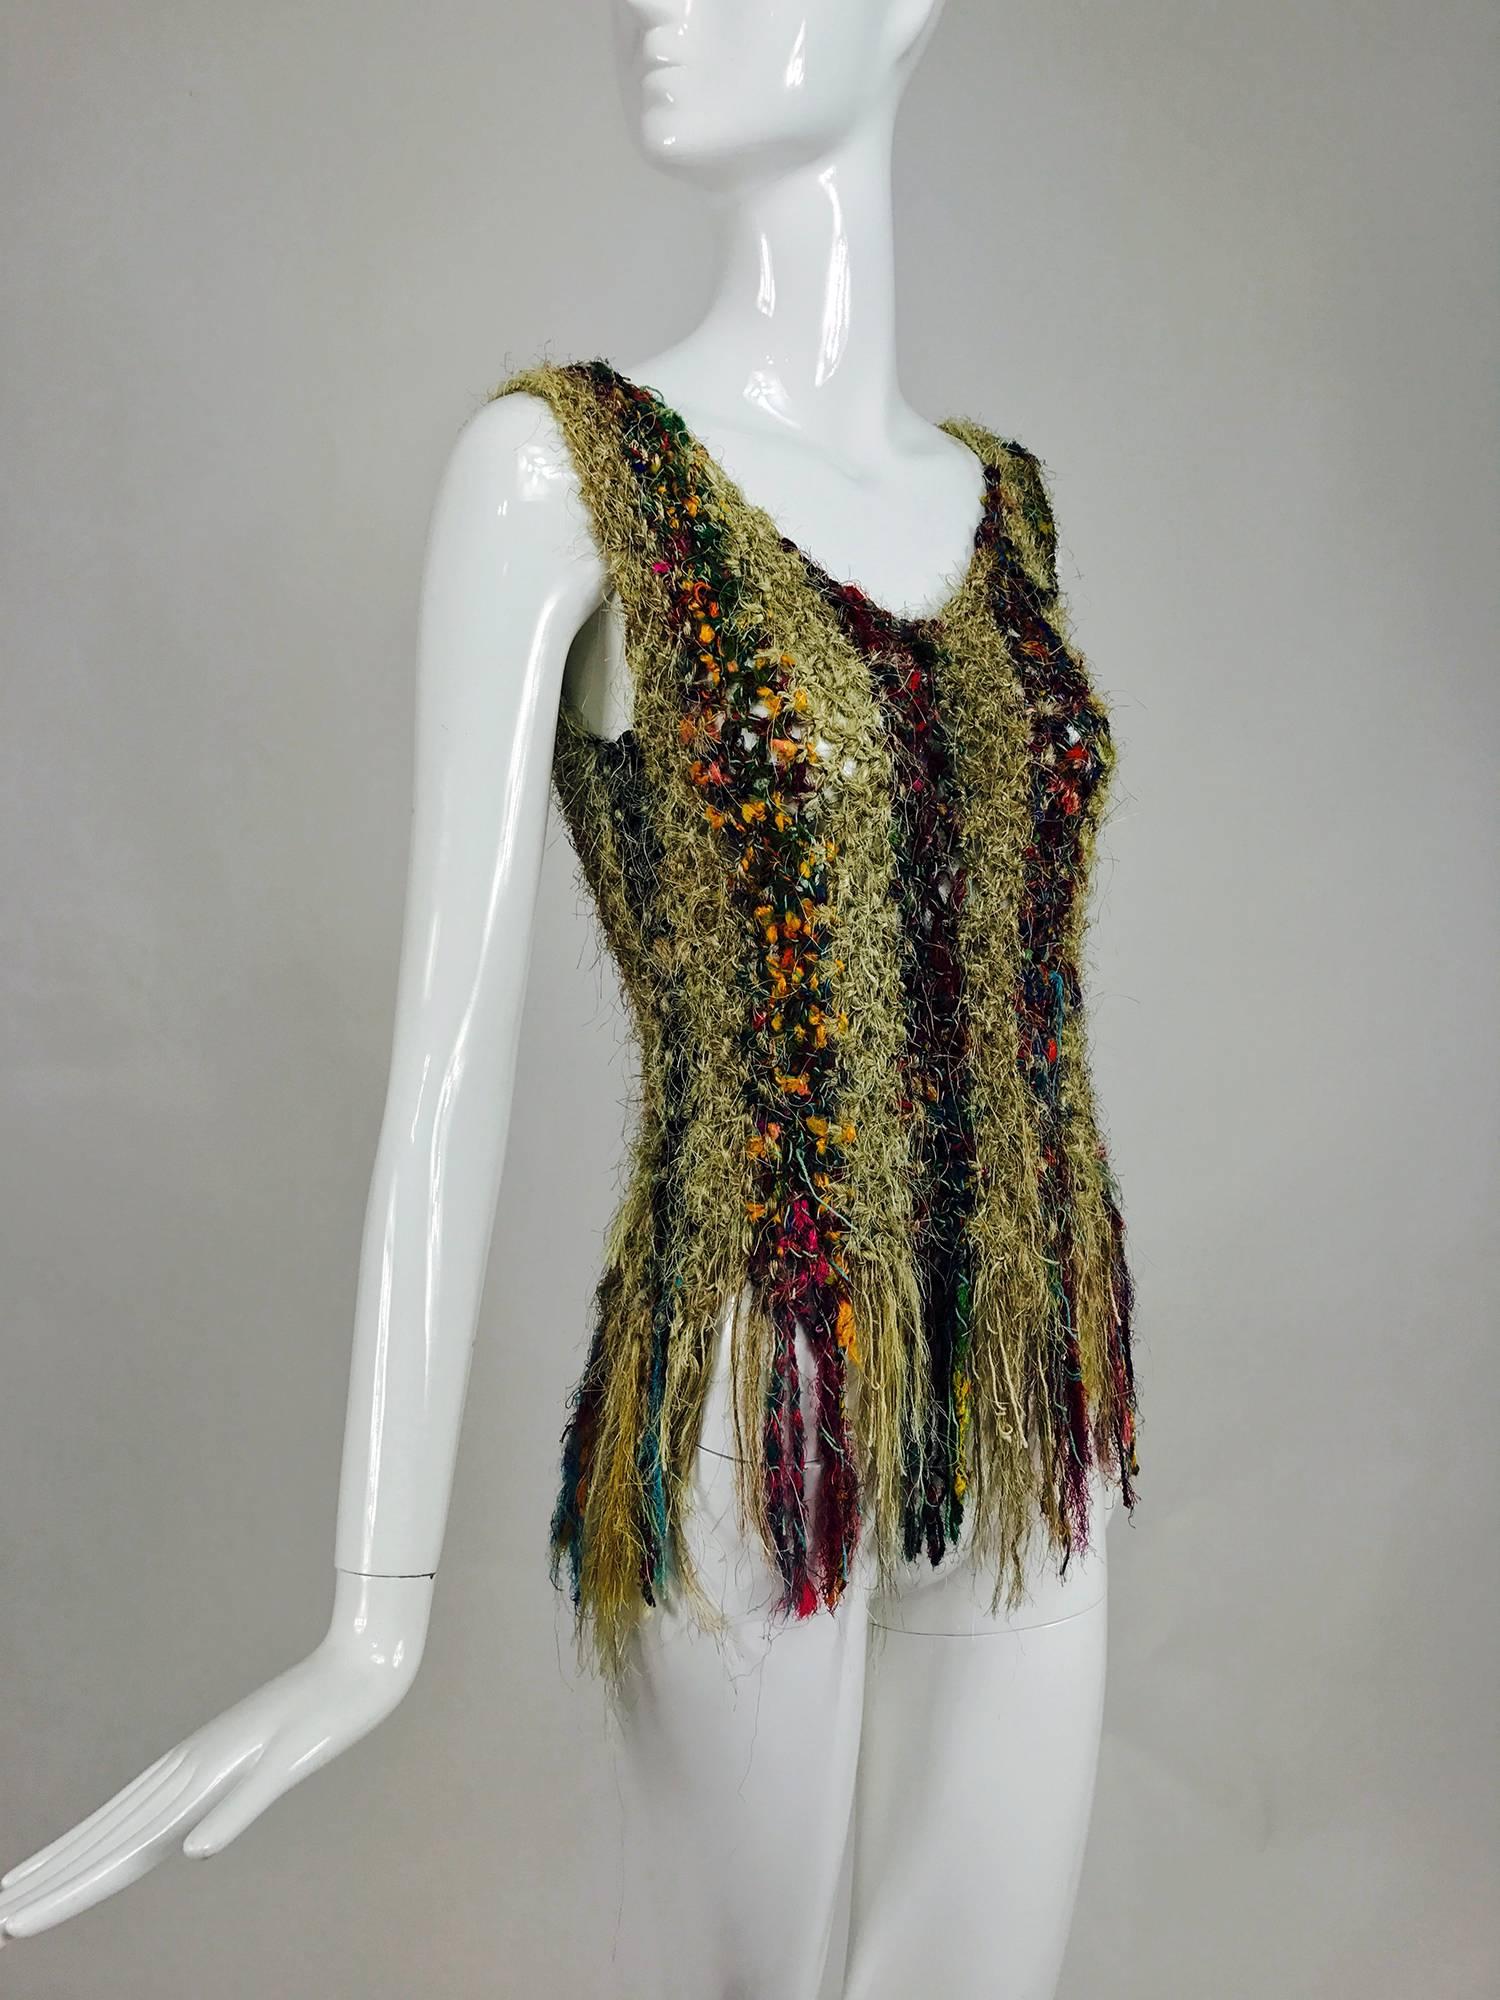 This unique hand woven top is made from multi colour silk threads, the hem features an irregular fringe...Scoop neck and fitted it is pretty amazing, with colour and texture...Fits a size small...

In excellent wearable condition... All our clothing